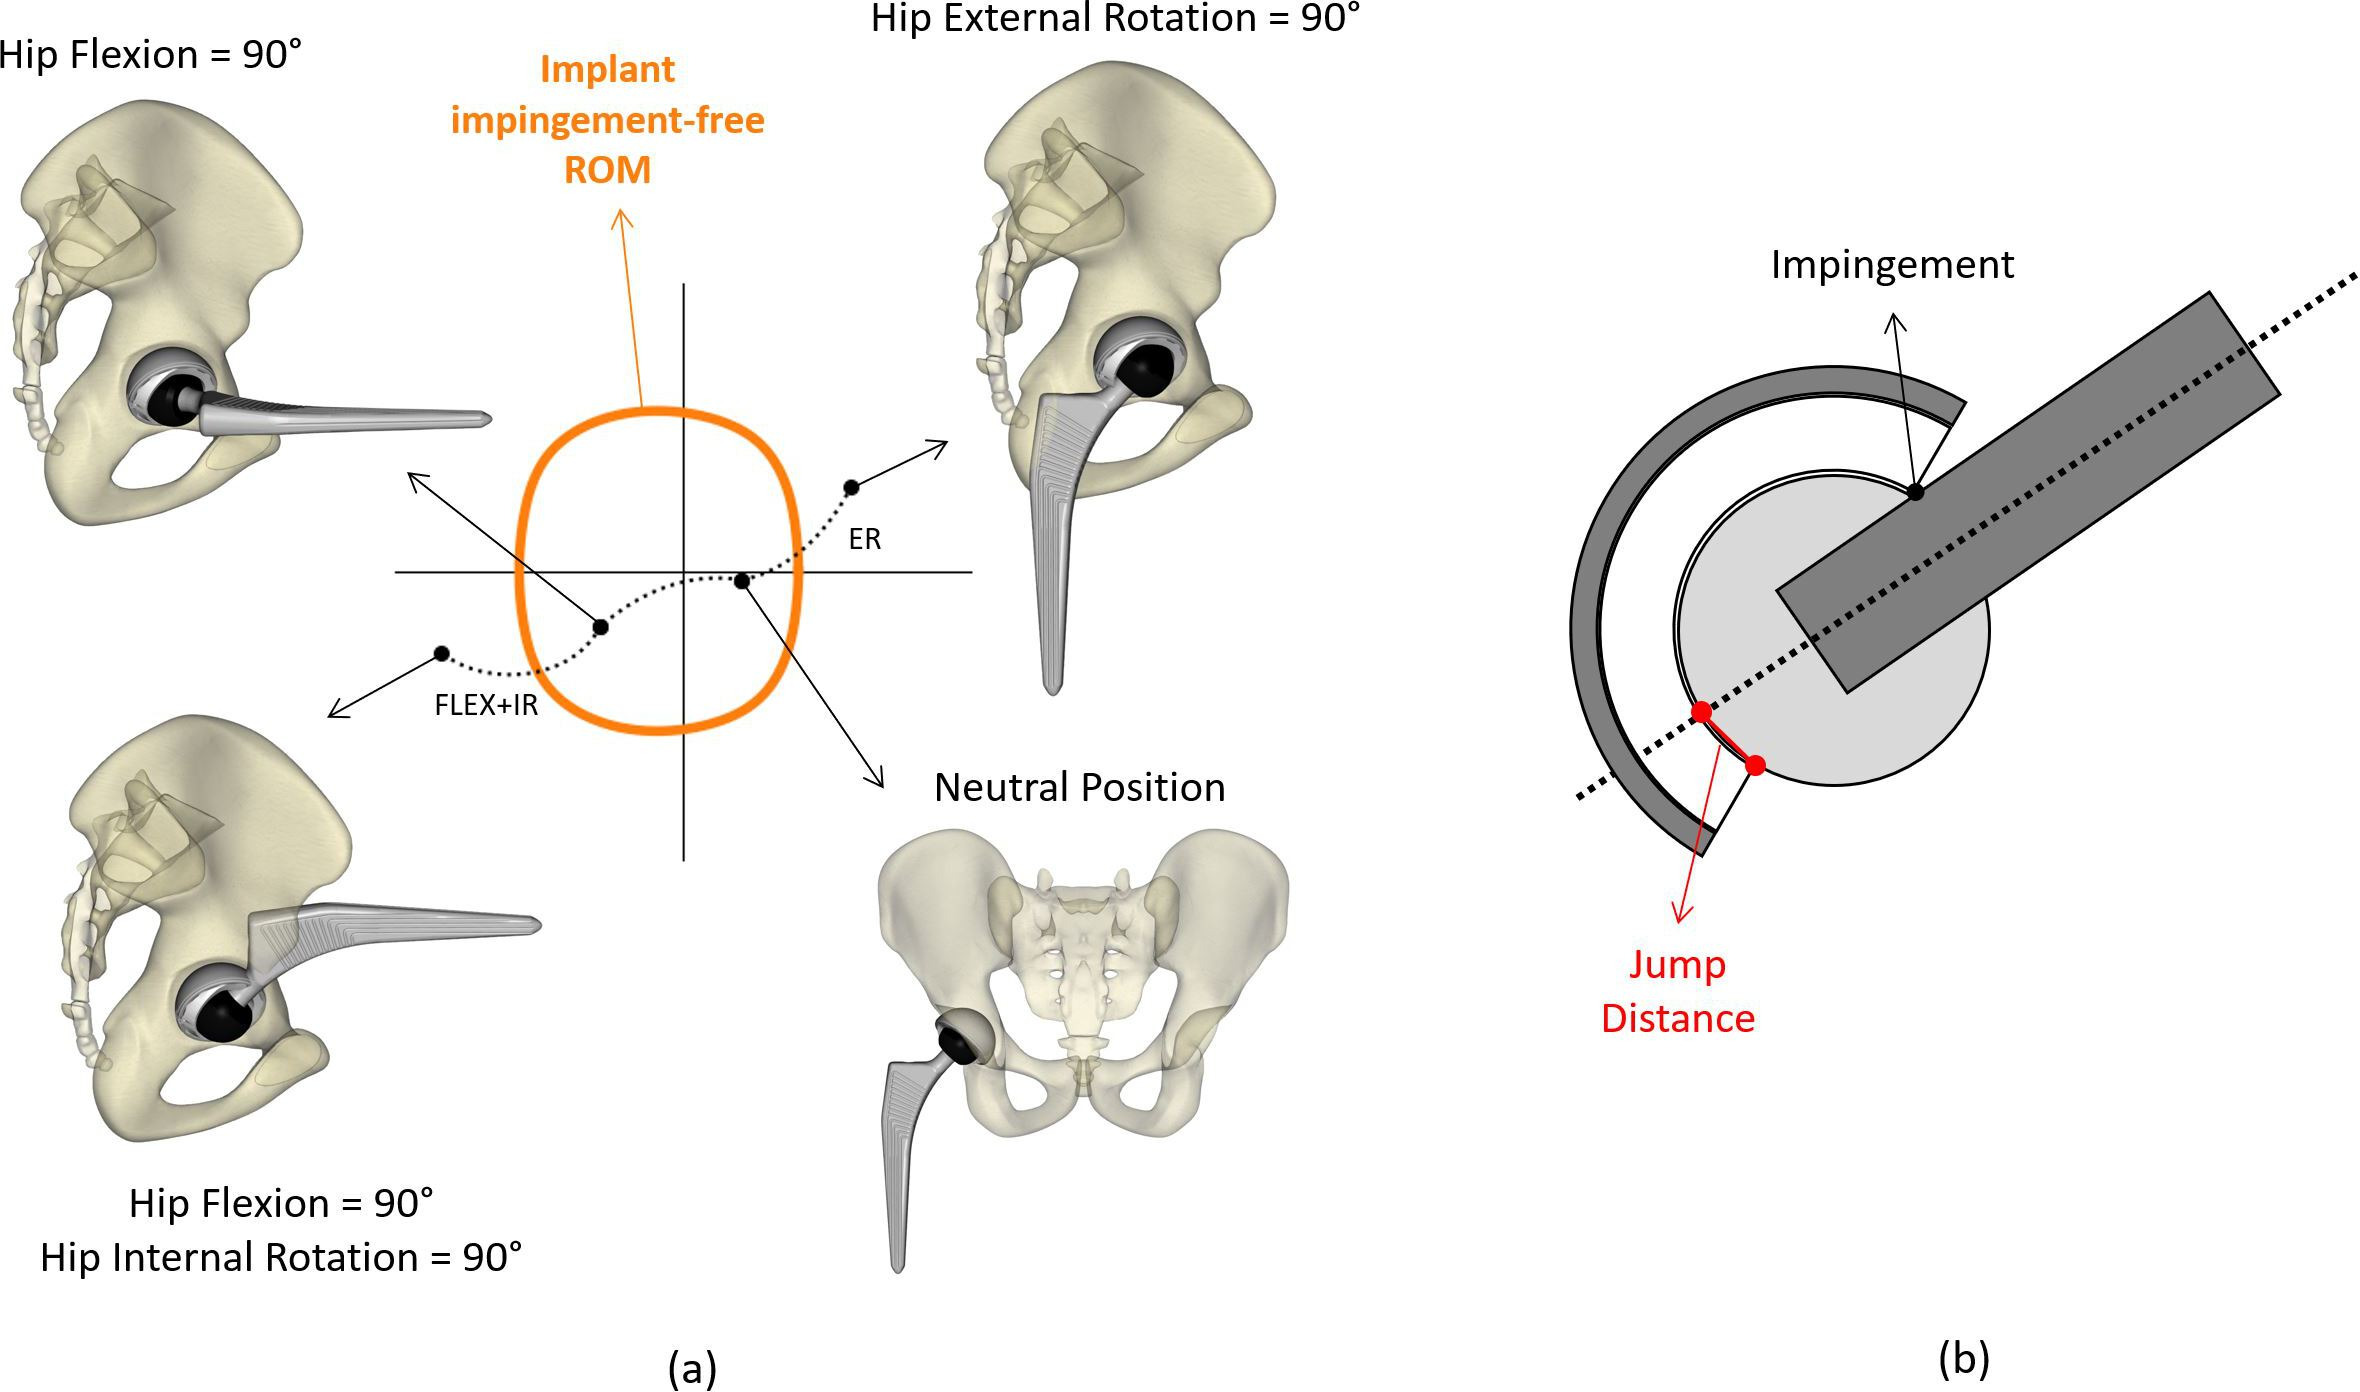 Fig. 3 
            a) Provocative dislocation manoeuvres as defined by Klemt et al,13 overlaid with the implant range of motion (ROM) to determine impingement occurrence. b) Jump distance at impingement calculated as the distance between the intersection of the stem neck axis on the liner and the liner edge. ER, external rotation until impingement; FLEX + IR, flexion to 90° followed by internal rotation until impingement.
          